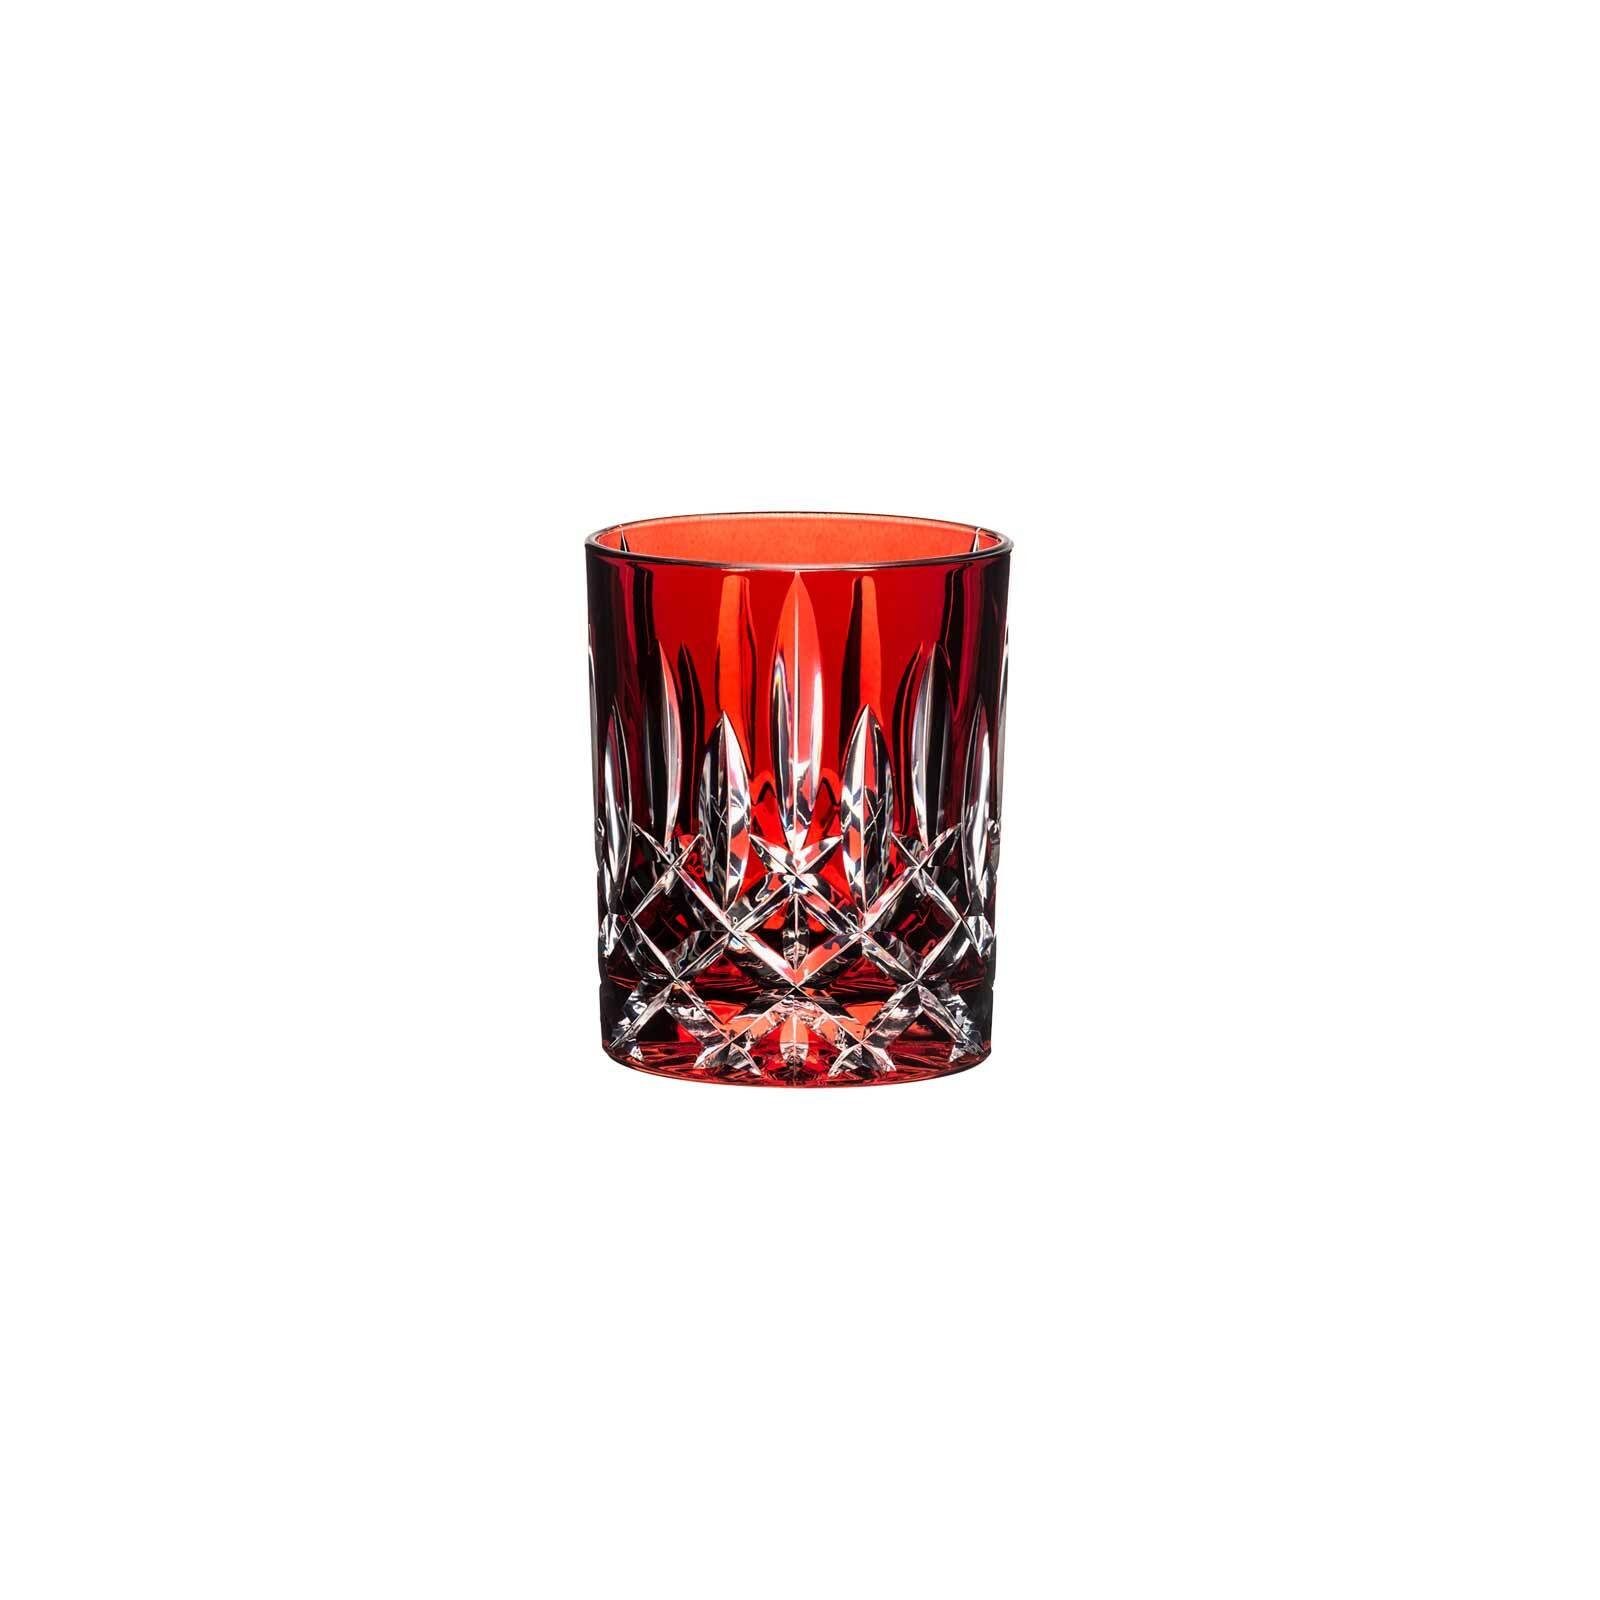 RIEDEL THE WINE GLASS COMPANY Whiskyglas Laudon Whiskyglas 295 ml, Glas